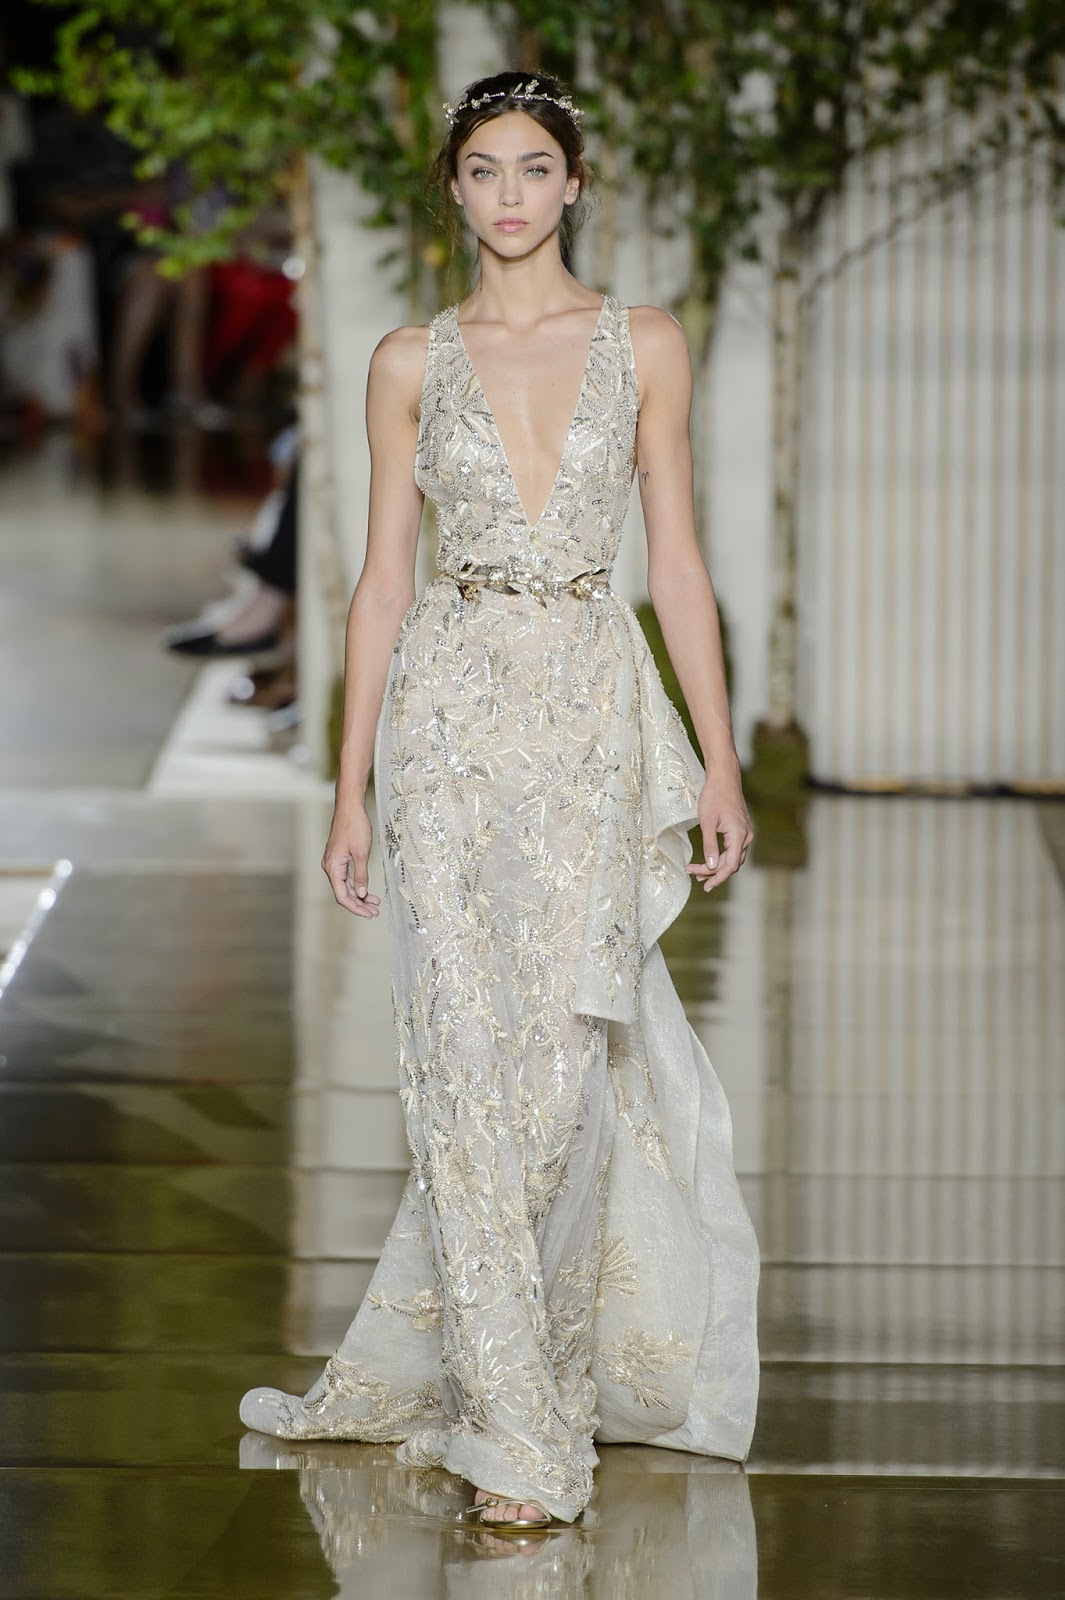 ZUHAIR MURAD HAUTE COUTURE July 12, 2017 | ZsaZsa Bellagio - Like No Other